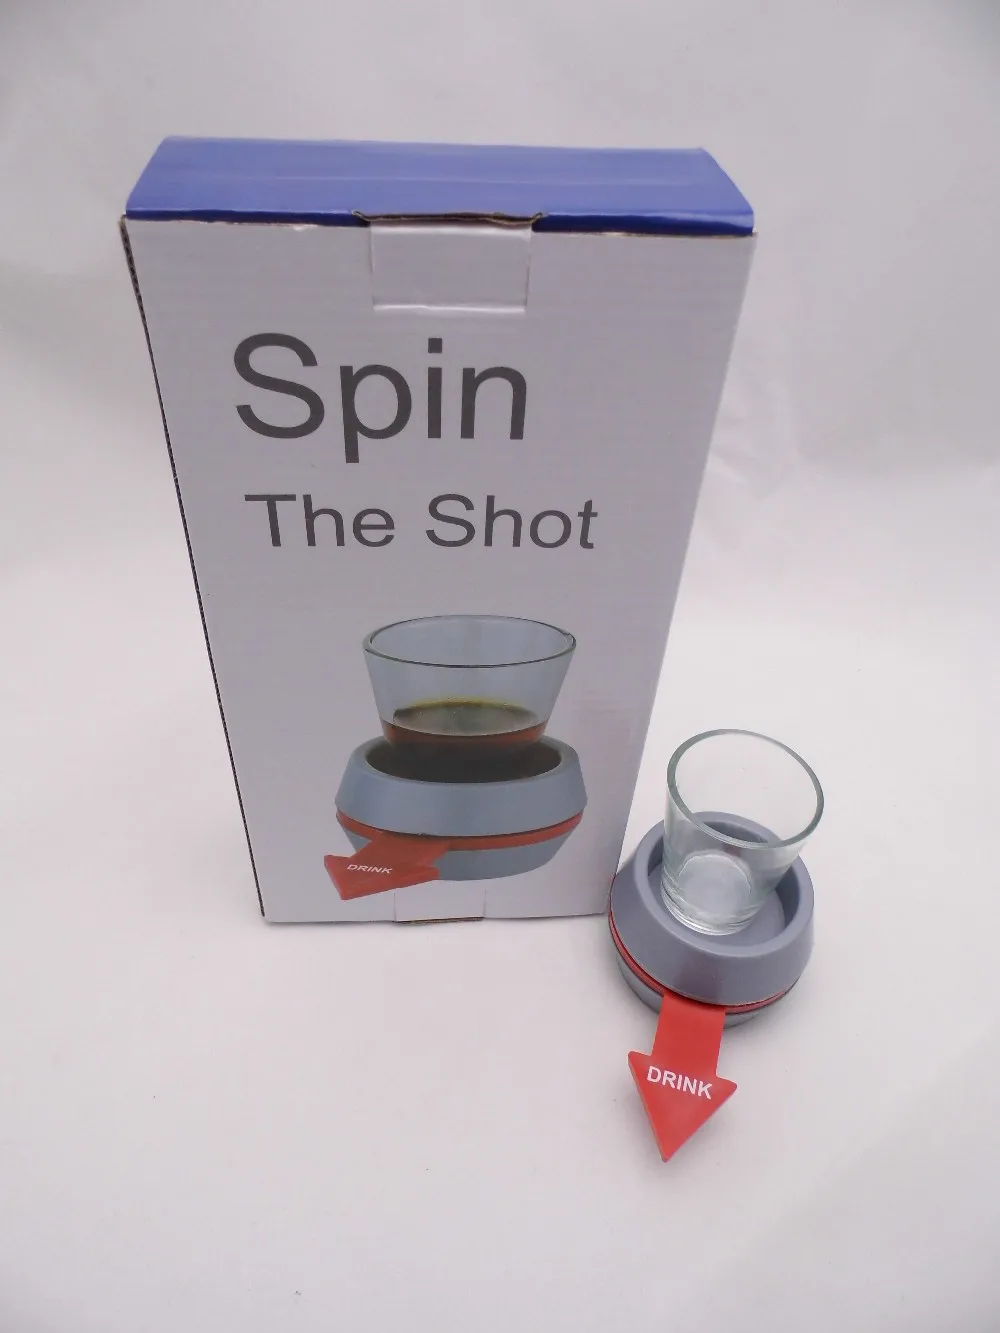 shot glass roulette rules